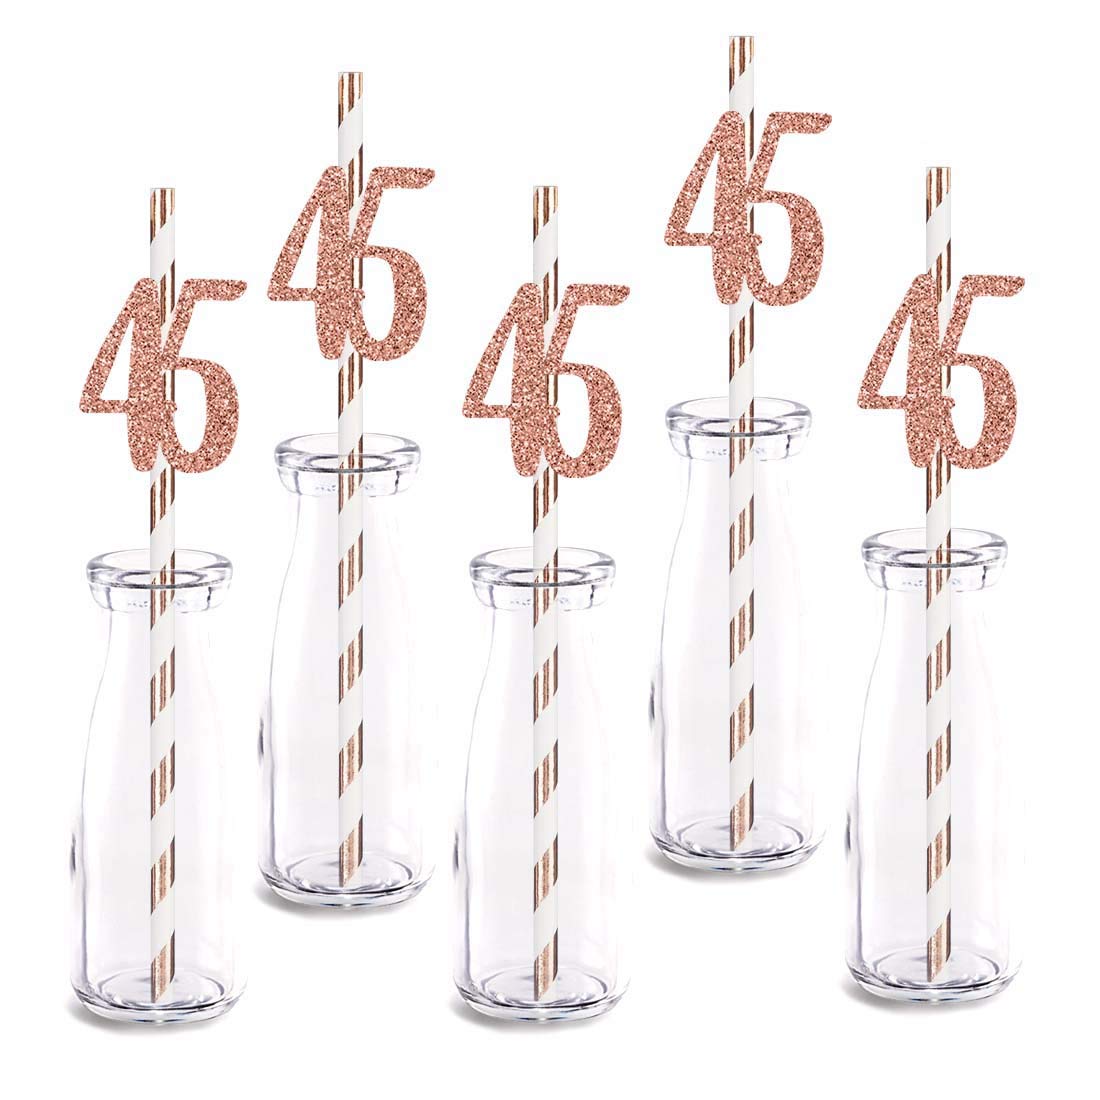 Rose Happy 45th Birthday Straw Decor, Rose Gold Glitter 24pcs Cut-Out Number 45 Party Drinking Decorative Straws, Supplies